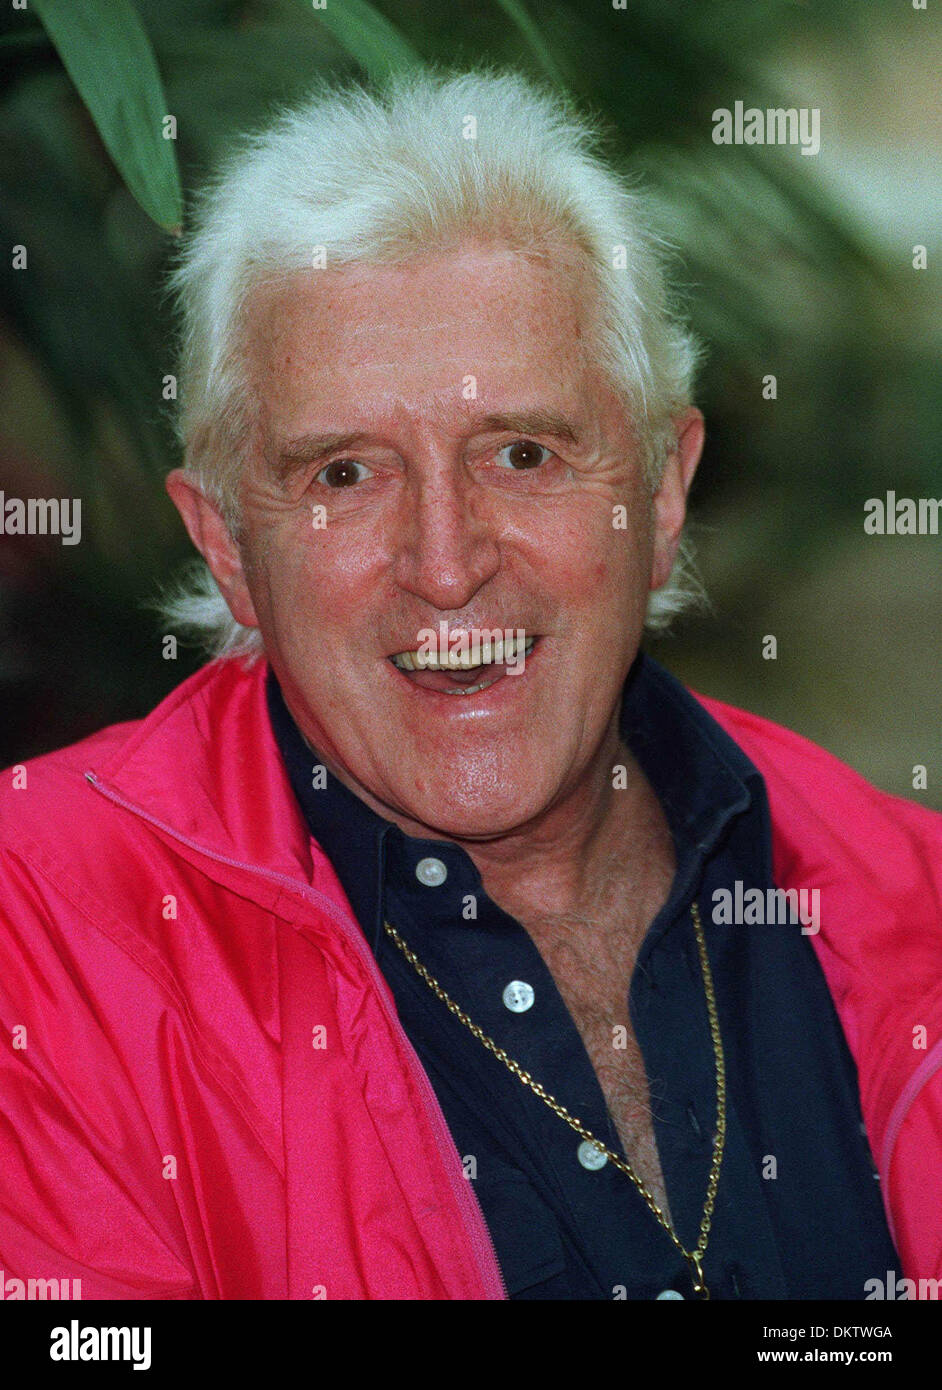 Jimmy Savile High Resolution Stock Photography and Images - Alamy